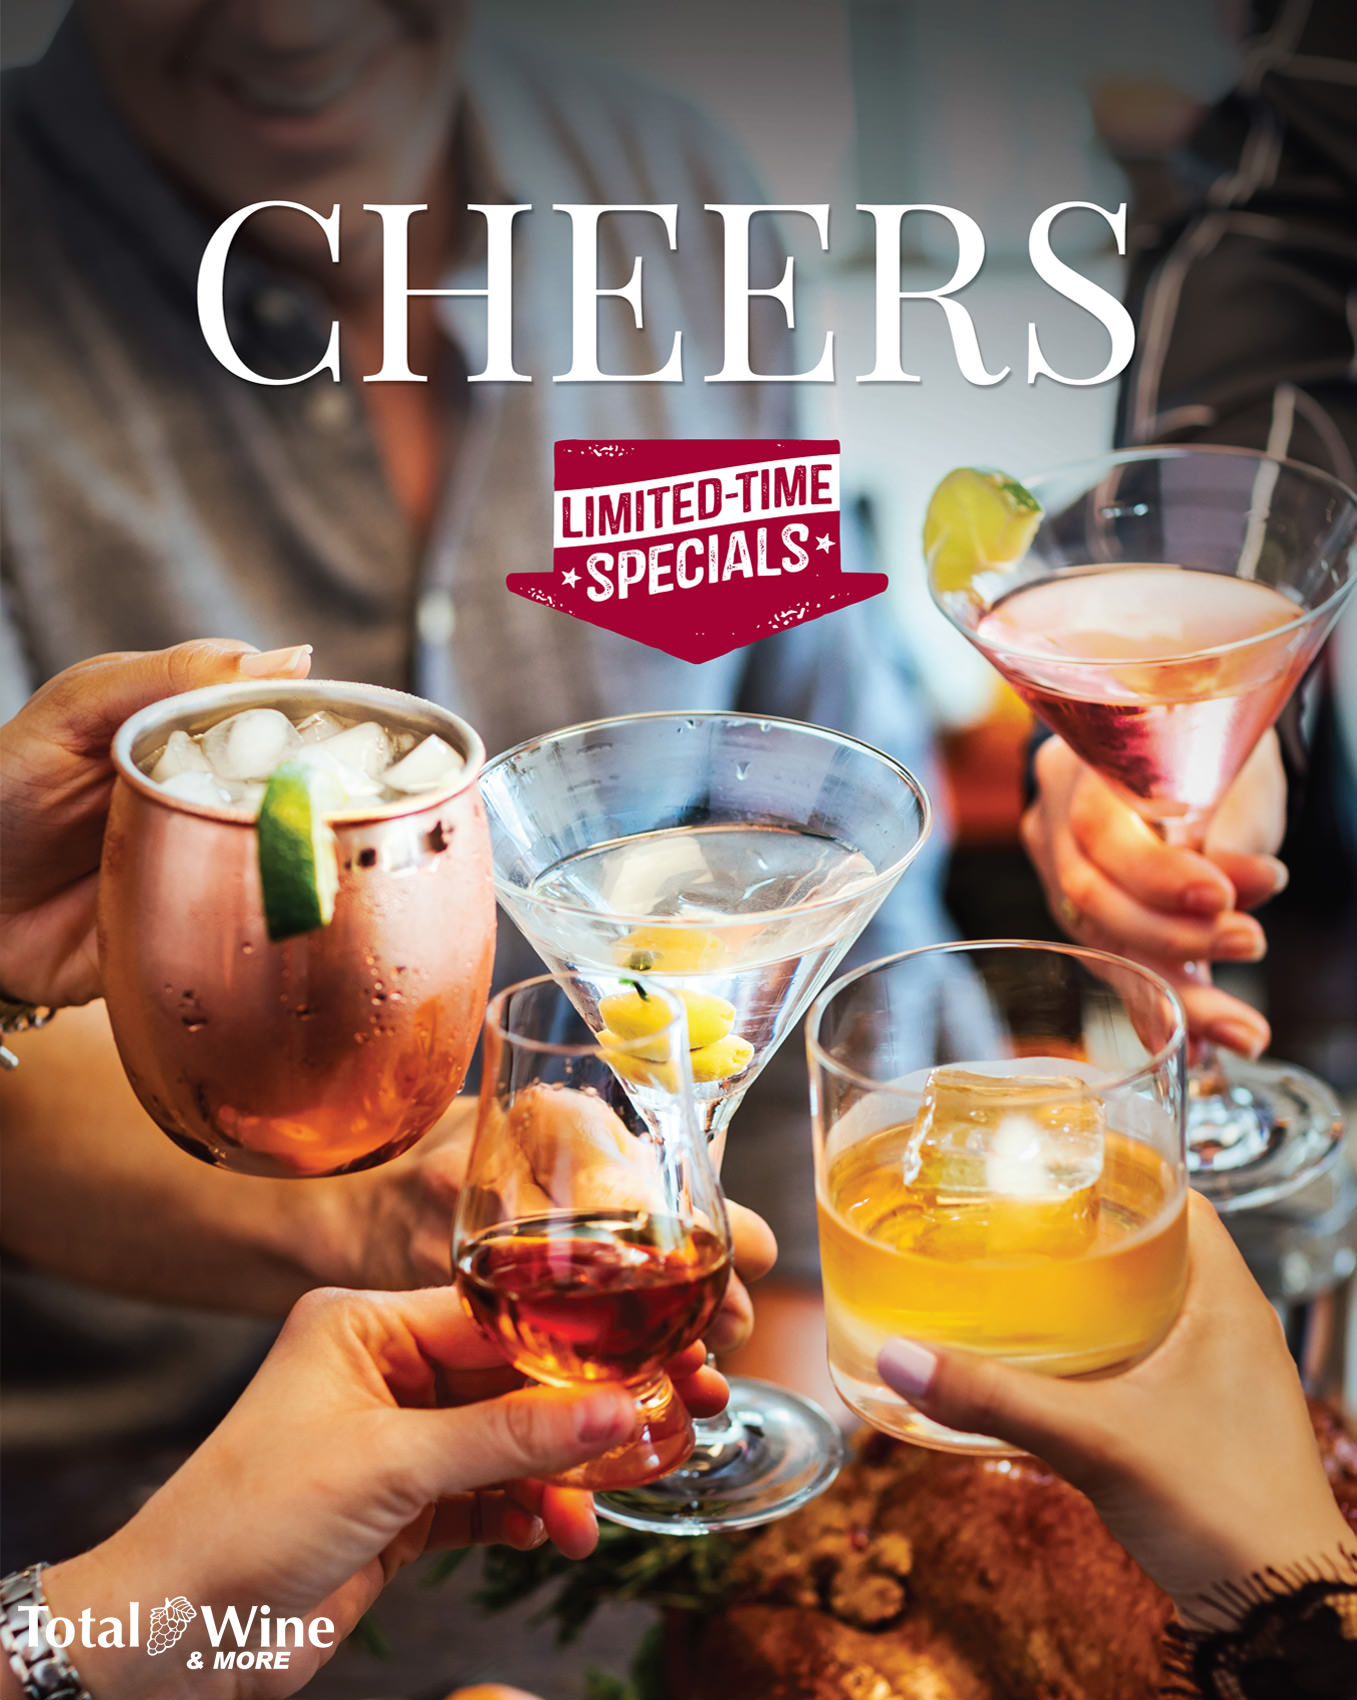 hands making toast with glasses for total wine & more advertisement, washington dc commercial photography